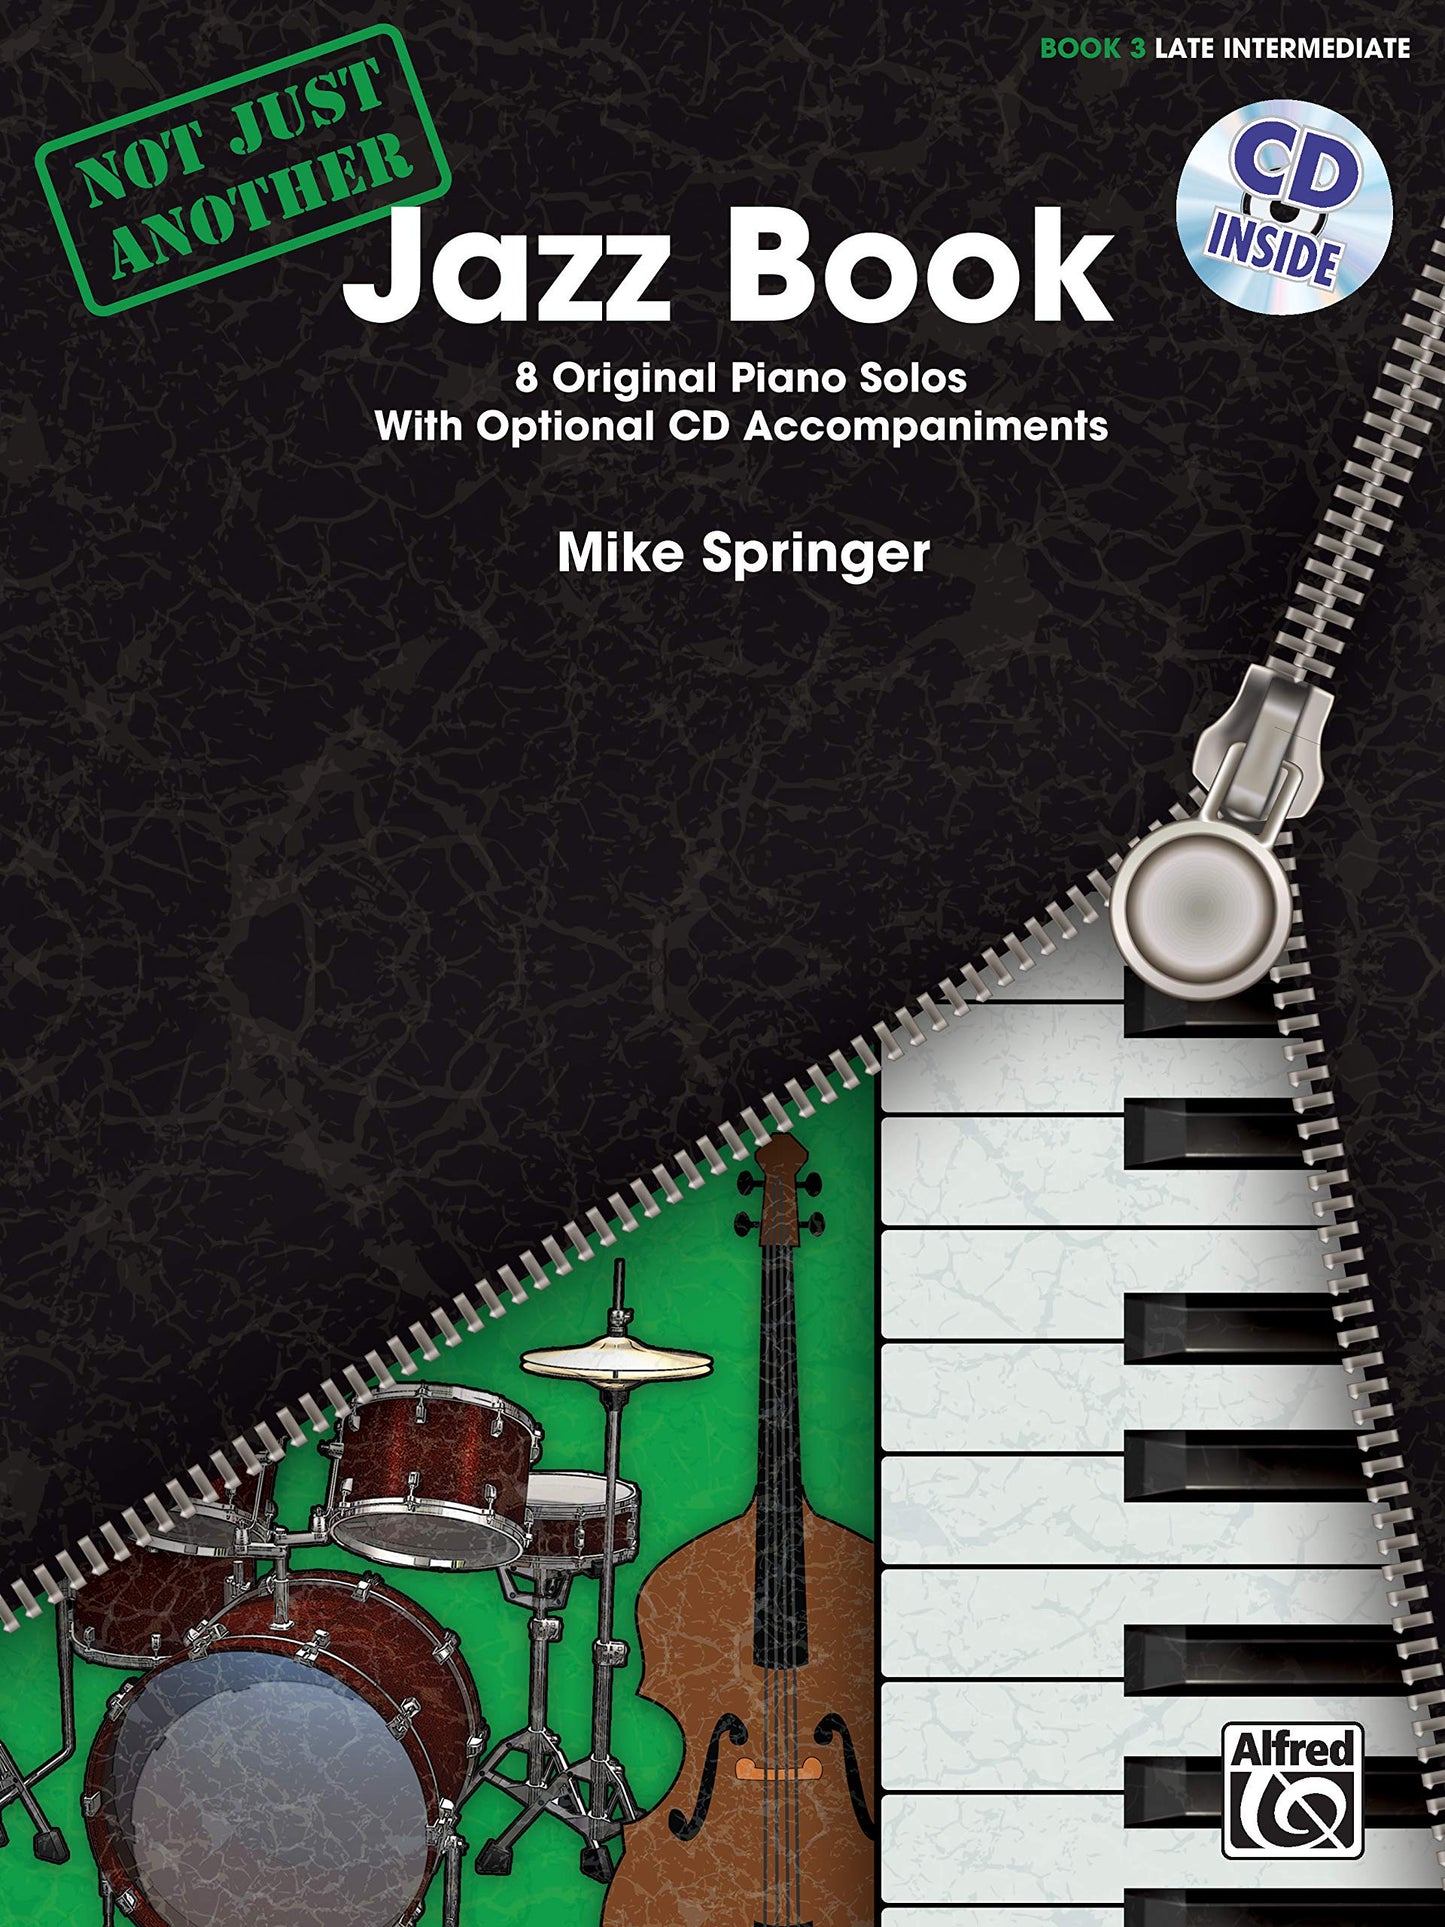 Not Just Another Jazz Book